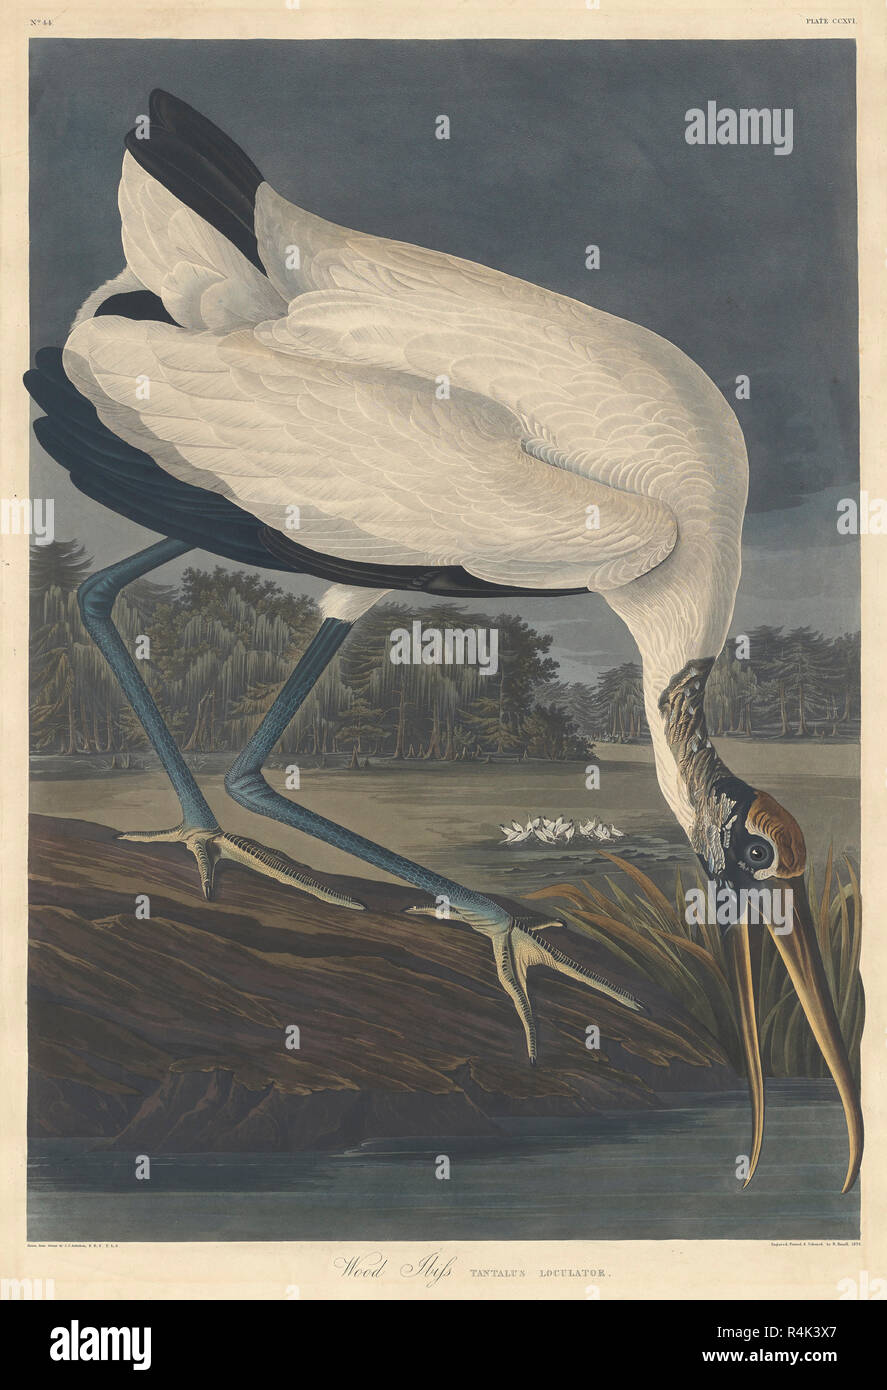 Wood Ibis. Dated: 1834. Medium: hand-colored engraving and aquatint on Whatman wove paper. Museum: National Gallery of Art, Washington DC. Author: Robert Havell after John James Audubon. Stock Photo